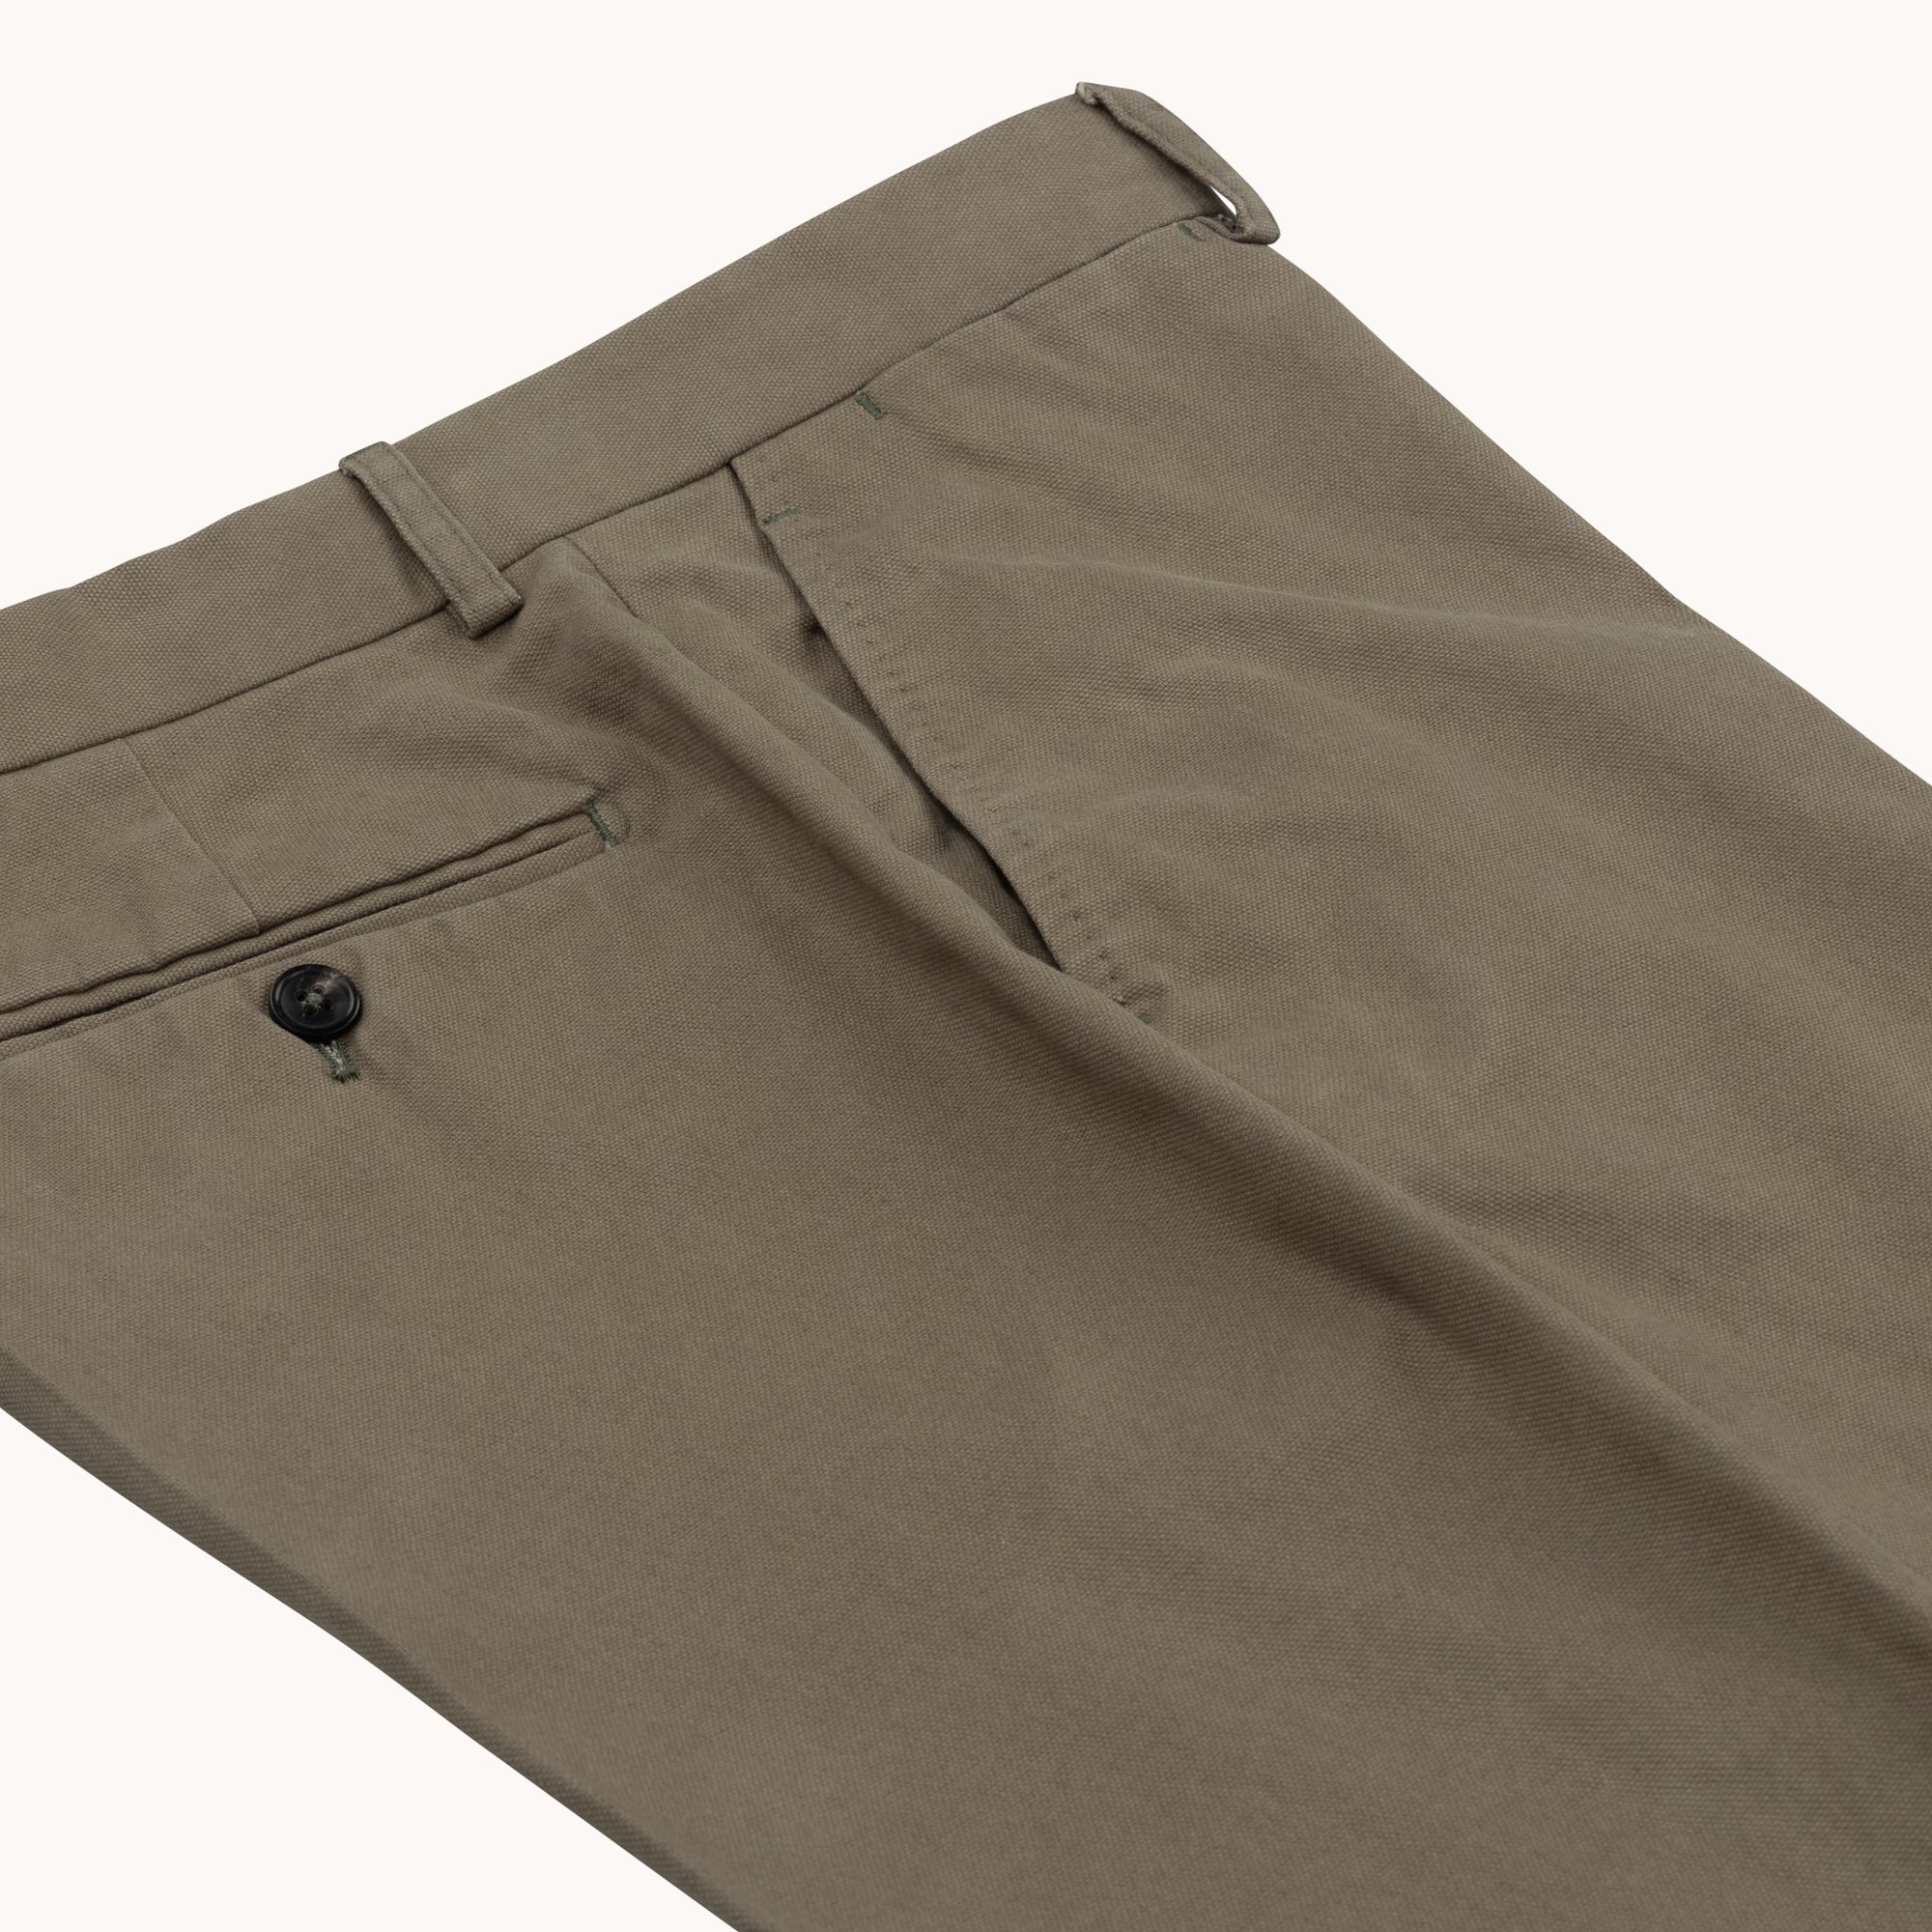 Garment Washed Flat Front Trouser - Olive Cotton Canvas